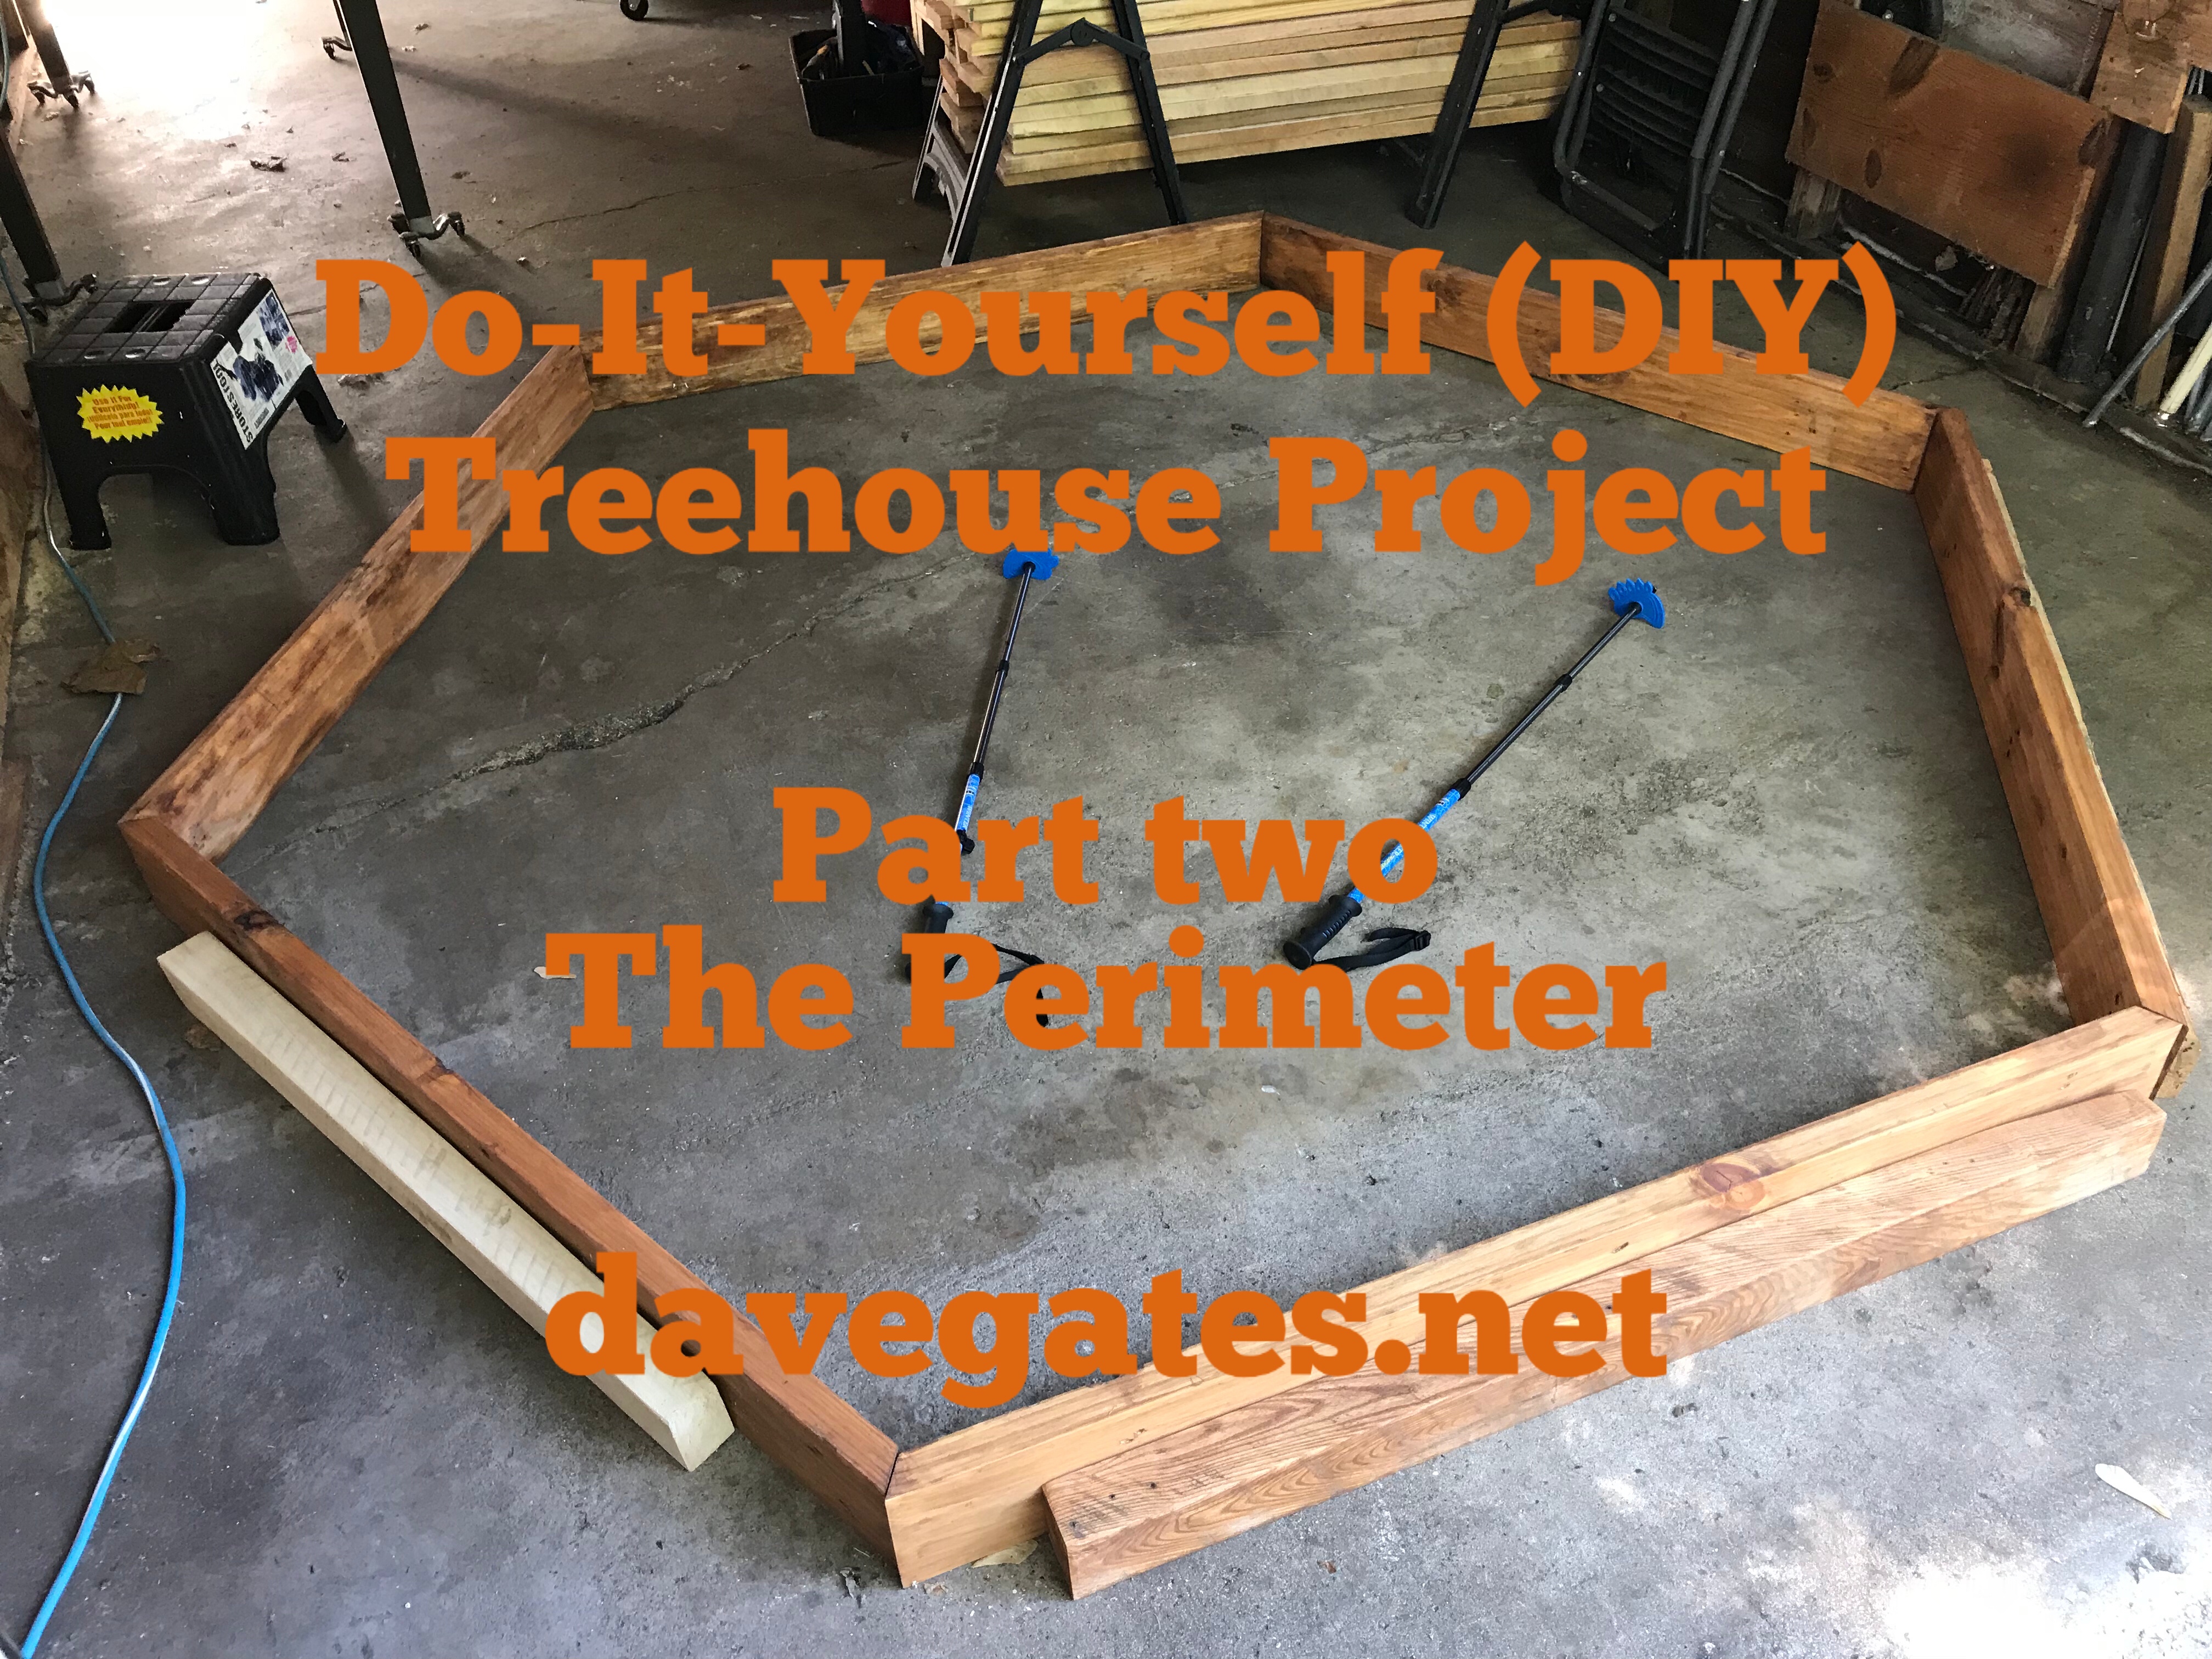 Do-It-Yourself TreeHouse Plans